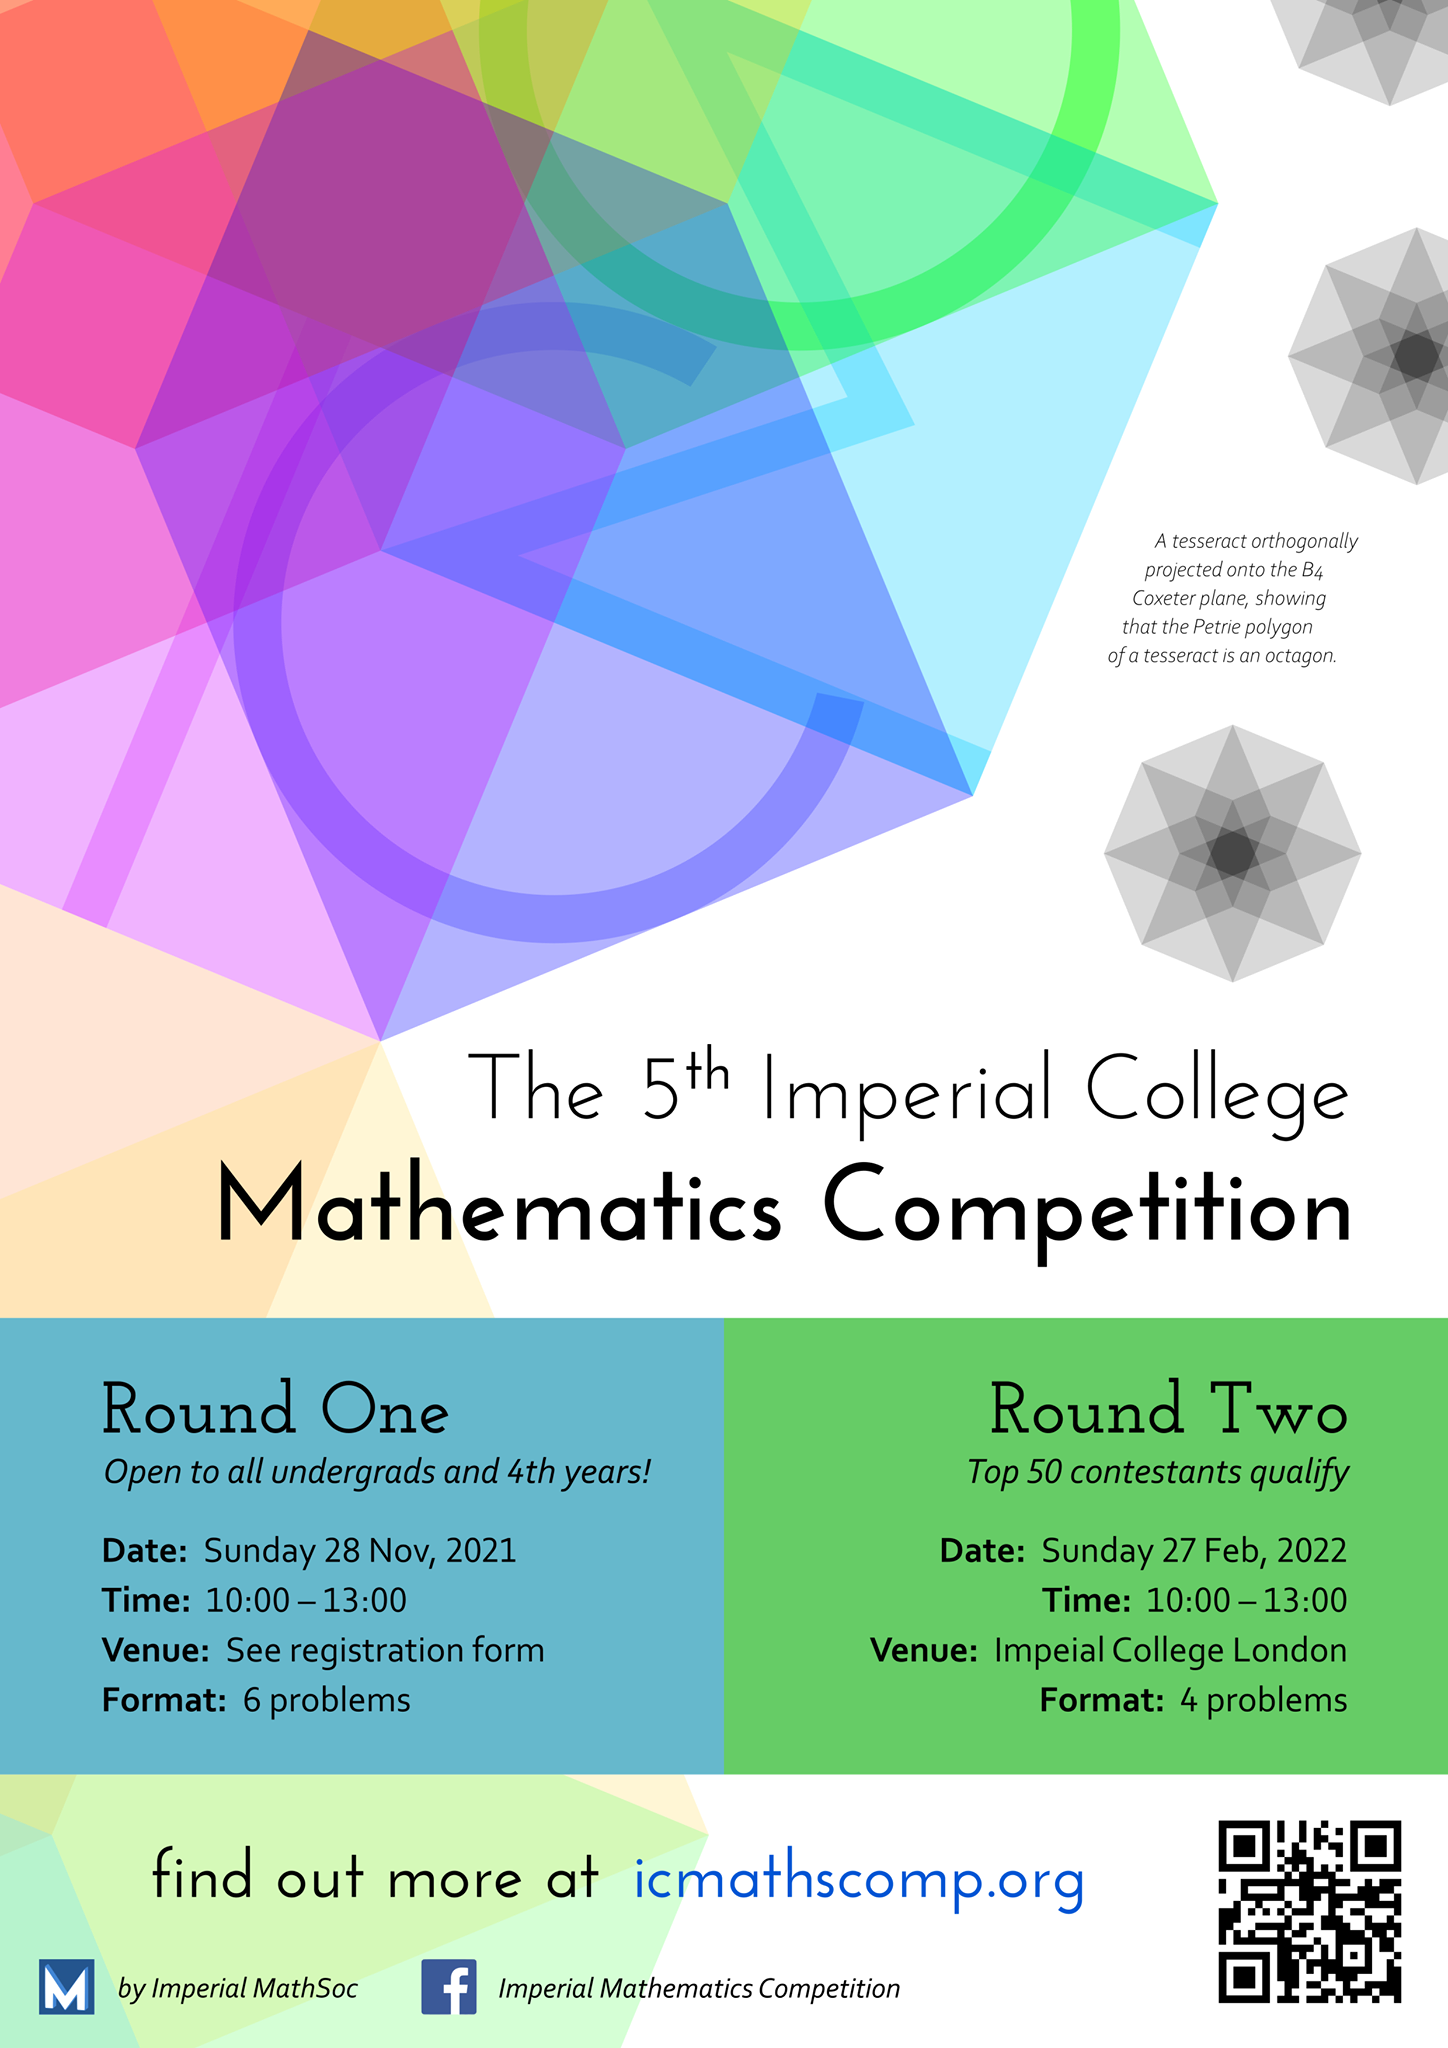 White background with large, overlapping, rainbow-coloured geometric shapes on the left and smaller grey geometric shapes on the right. Text in the middle of the poster reads 'The 5th Imperial College Mathematics Competition'. Below this are a blue box on the left and a green box on the right. Text in the blue box reads: 'Round One; Open to all undergrads and 4th years! Date: Sunday 28 Nov, 2021; Time: 10:00 - 13:00; Venue: See registration form; Format: 6 problems'. Text in the green box reads: 'Round Two; Top 50 contestants qualify; Date: Sunday 27 Feb, 2022; Time: 10:00 - 13:00; Venue: Imperial College London; Format: 4 problems'. At the bottom, there is a QR code and text reading: 'find out more at icmathscomp.org; by Imperial MathSoc; Imperial Mathematics Competition', placed next to the society's and the Facebook logo. In the top right there is text reading: 'A tesseract orthogonally projected onto the B4 Coxeter plane, showing that the Petrie polygon of a tesseract is an octagon